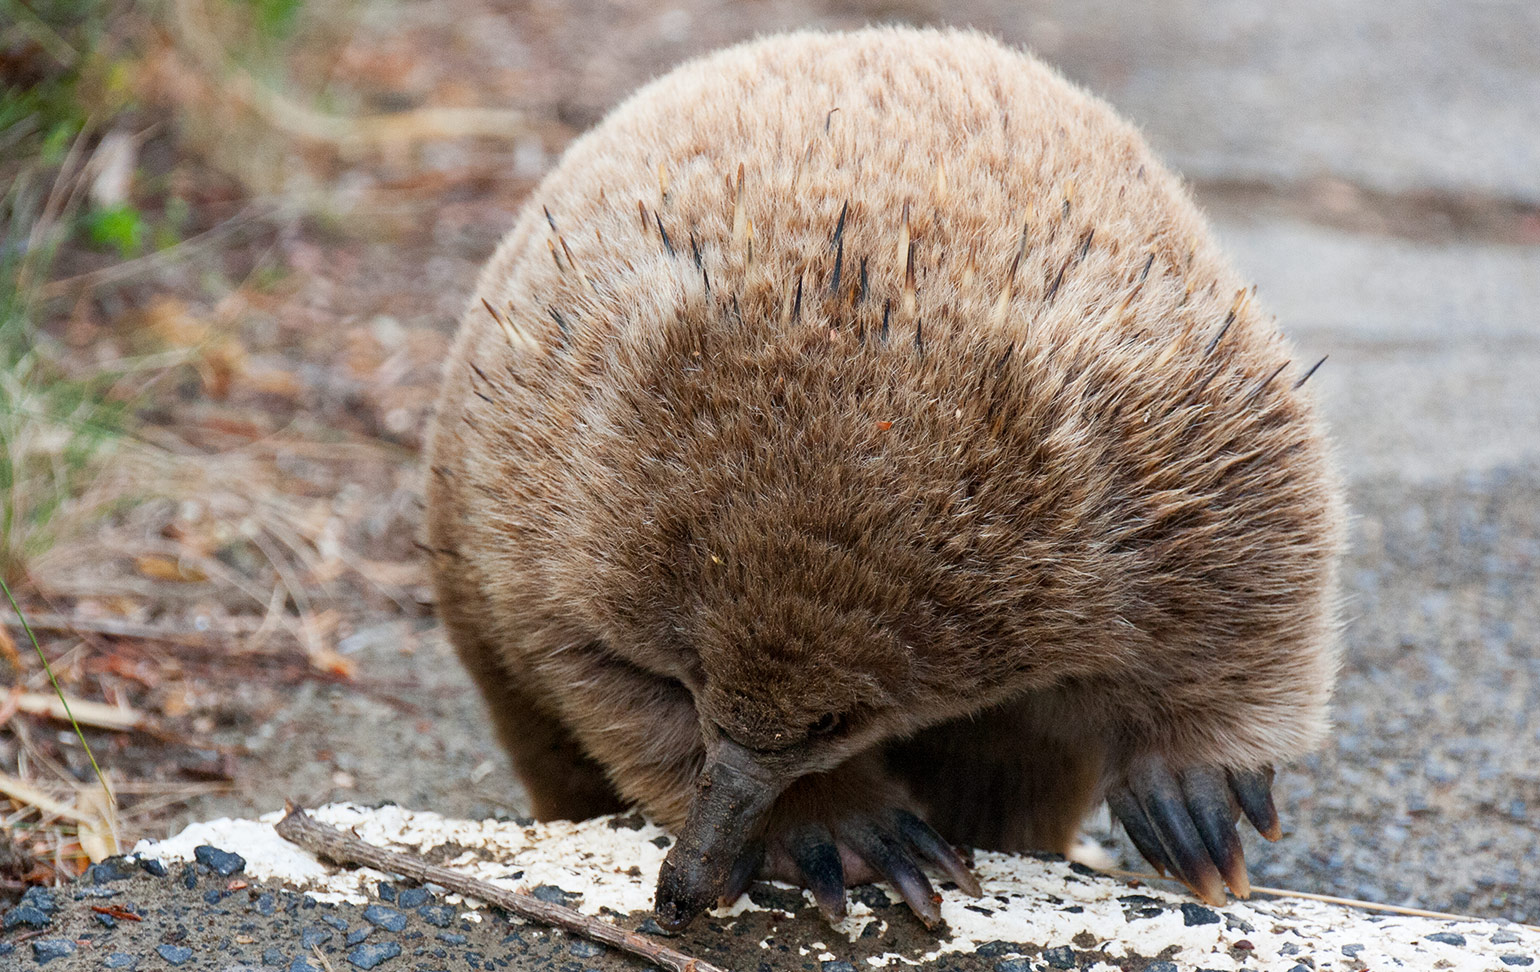 Echidna at Bruny Island Lighthouse